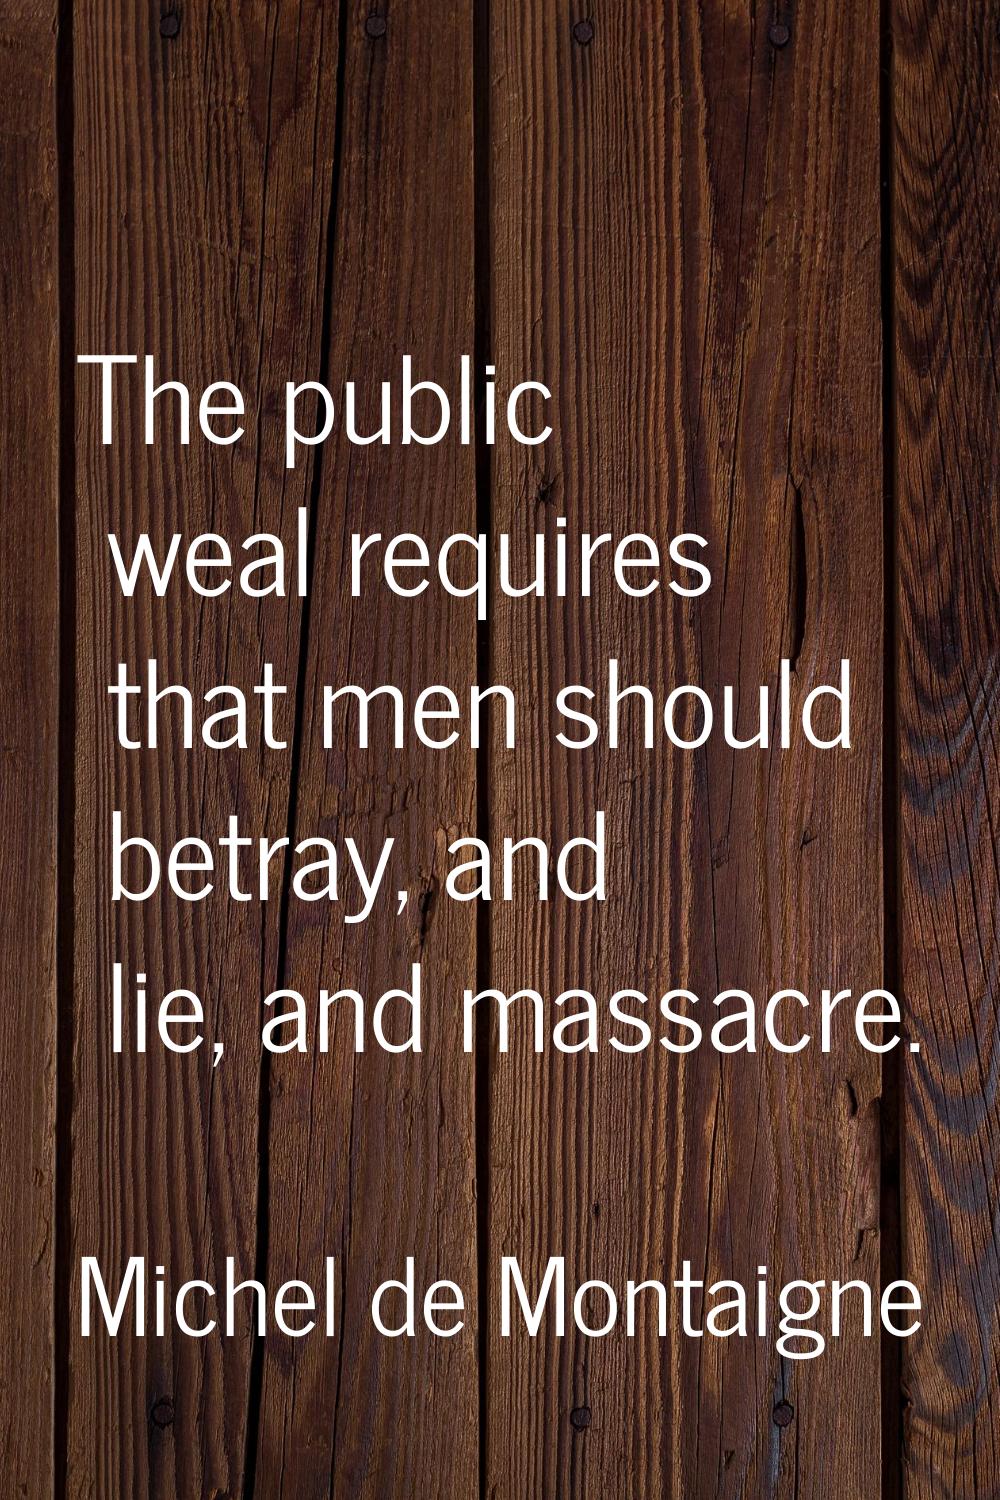 The public weal requires that men should betray, and lie, and massacre.